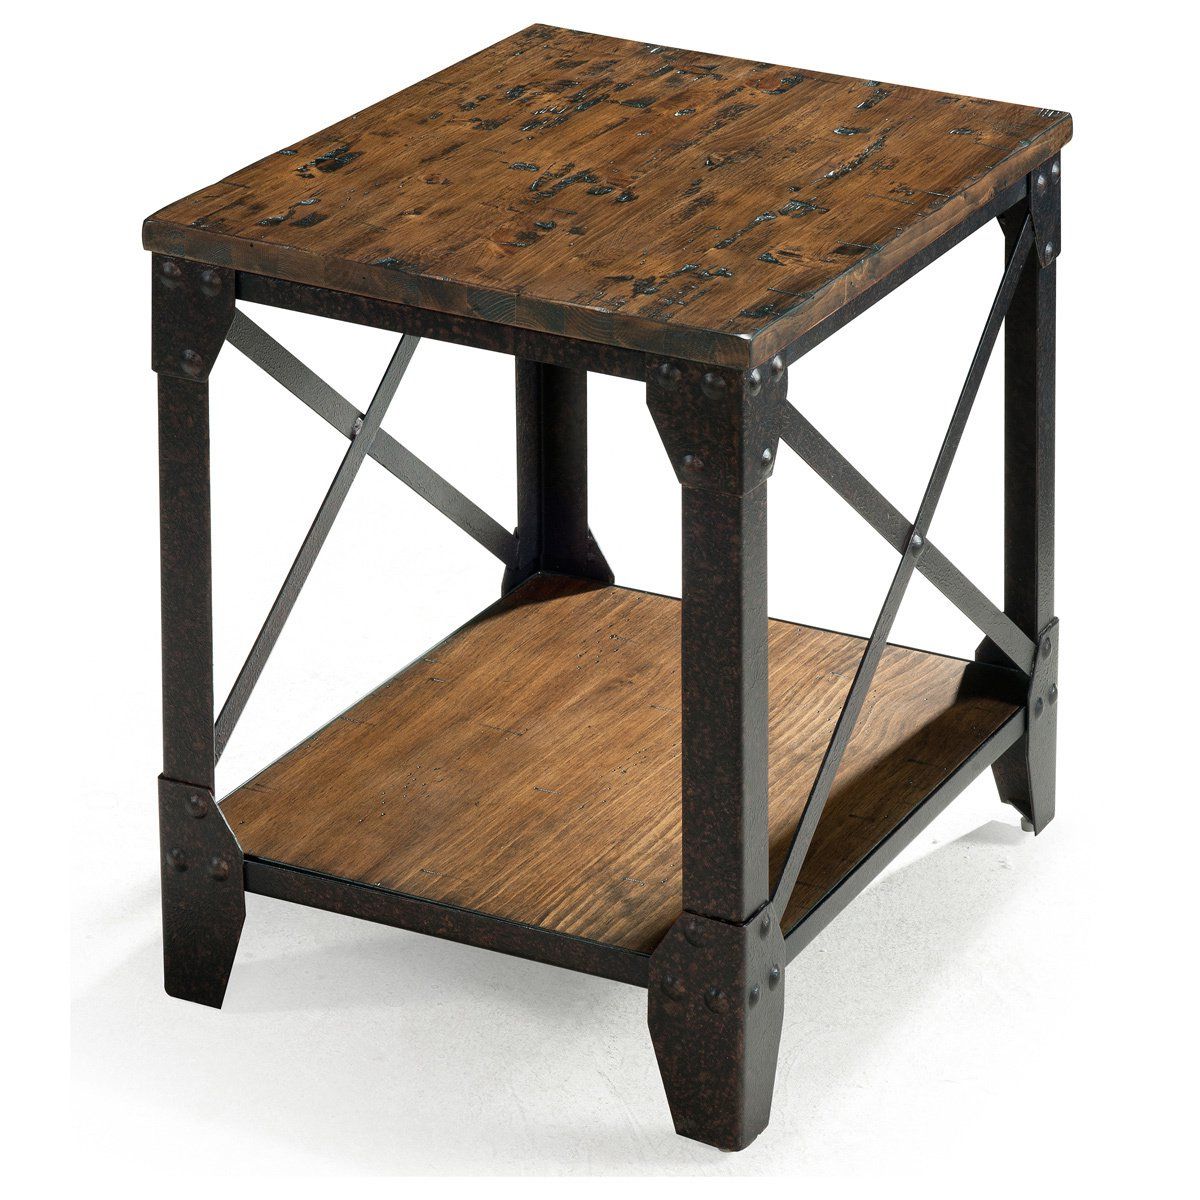 Natural Pine Coffee Tables In Popular Shop Pinebrook Industrial Distressed Natural Pine Wood Side Table (View 7 of 20)